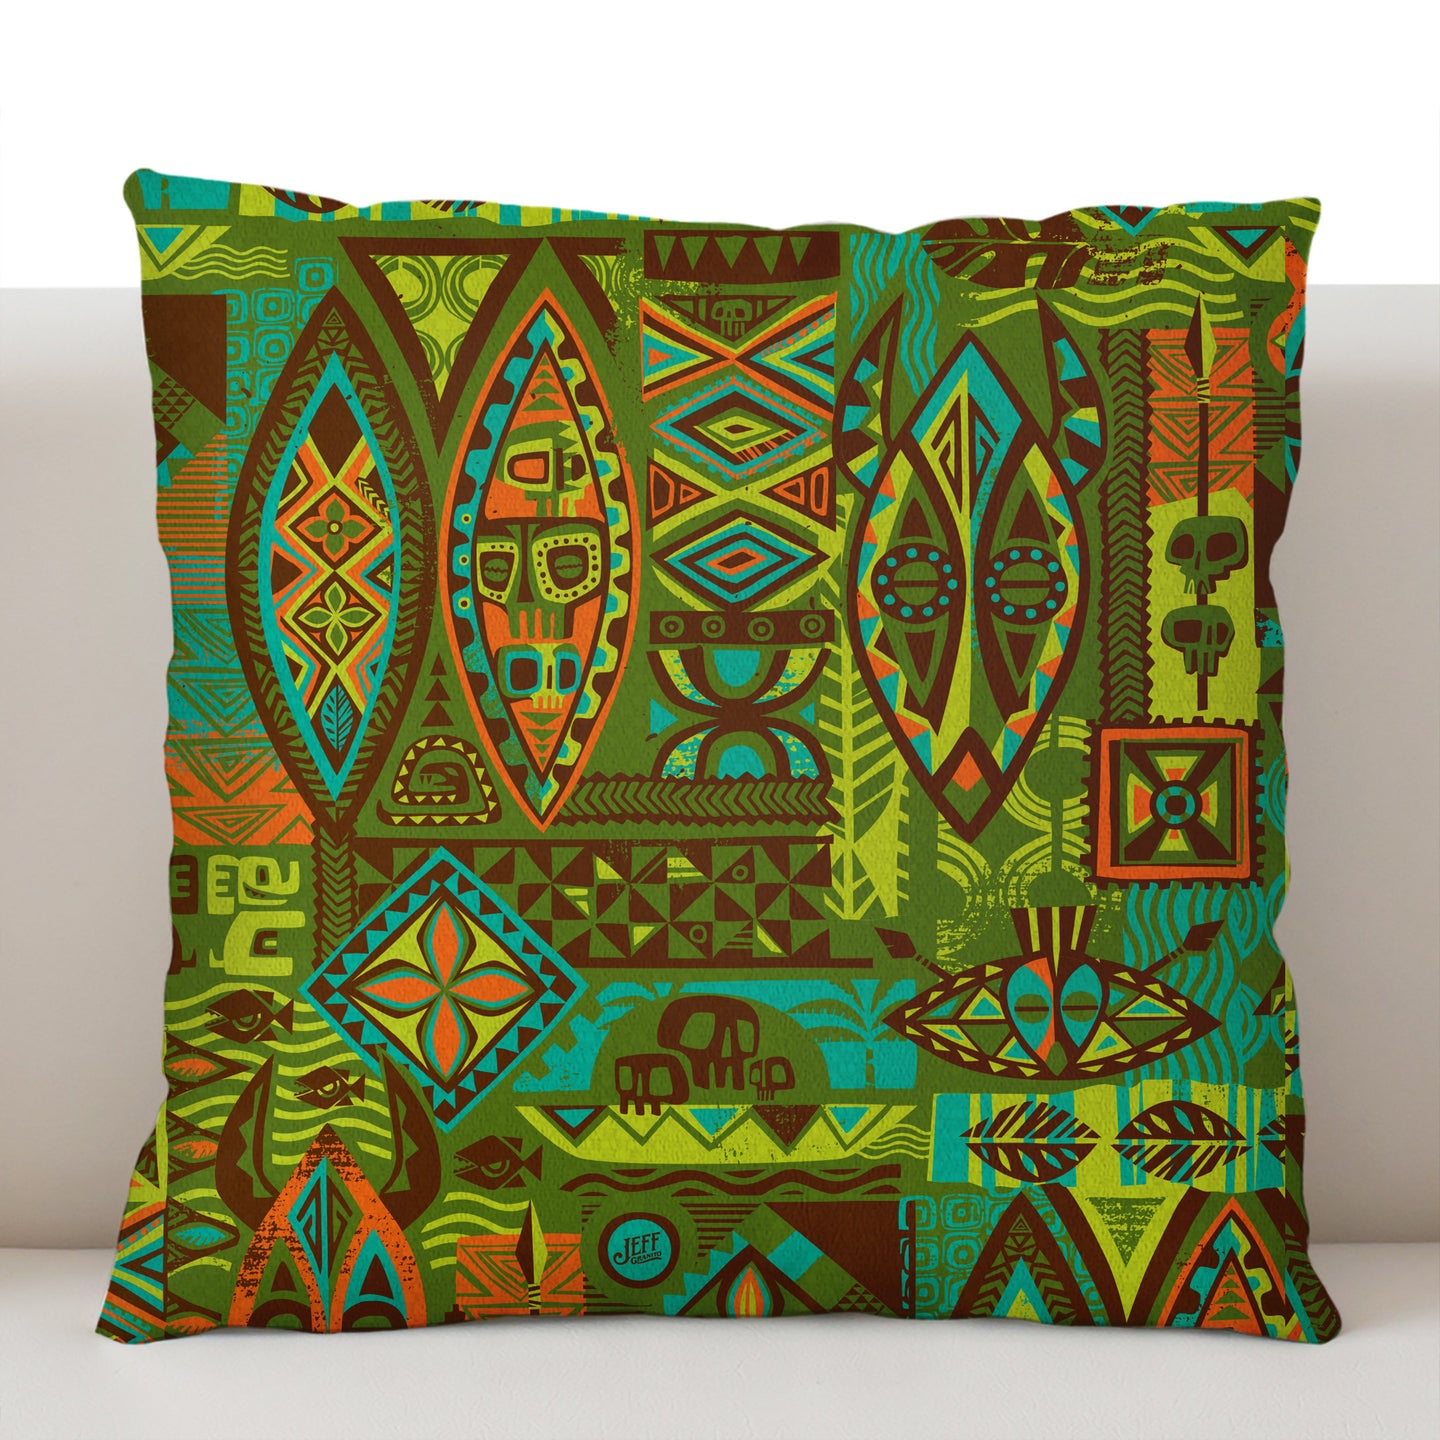 Jungle Greeting Pillow Cover